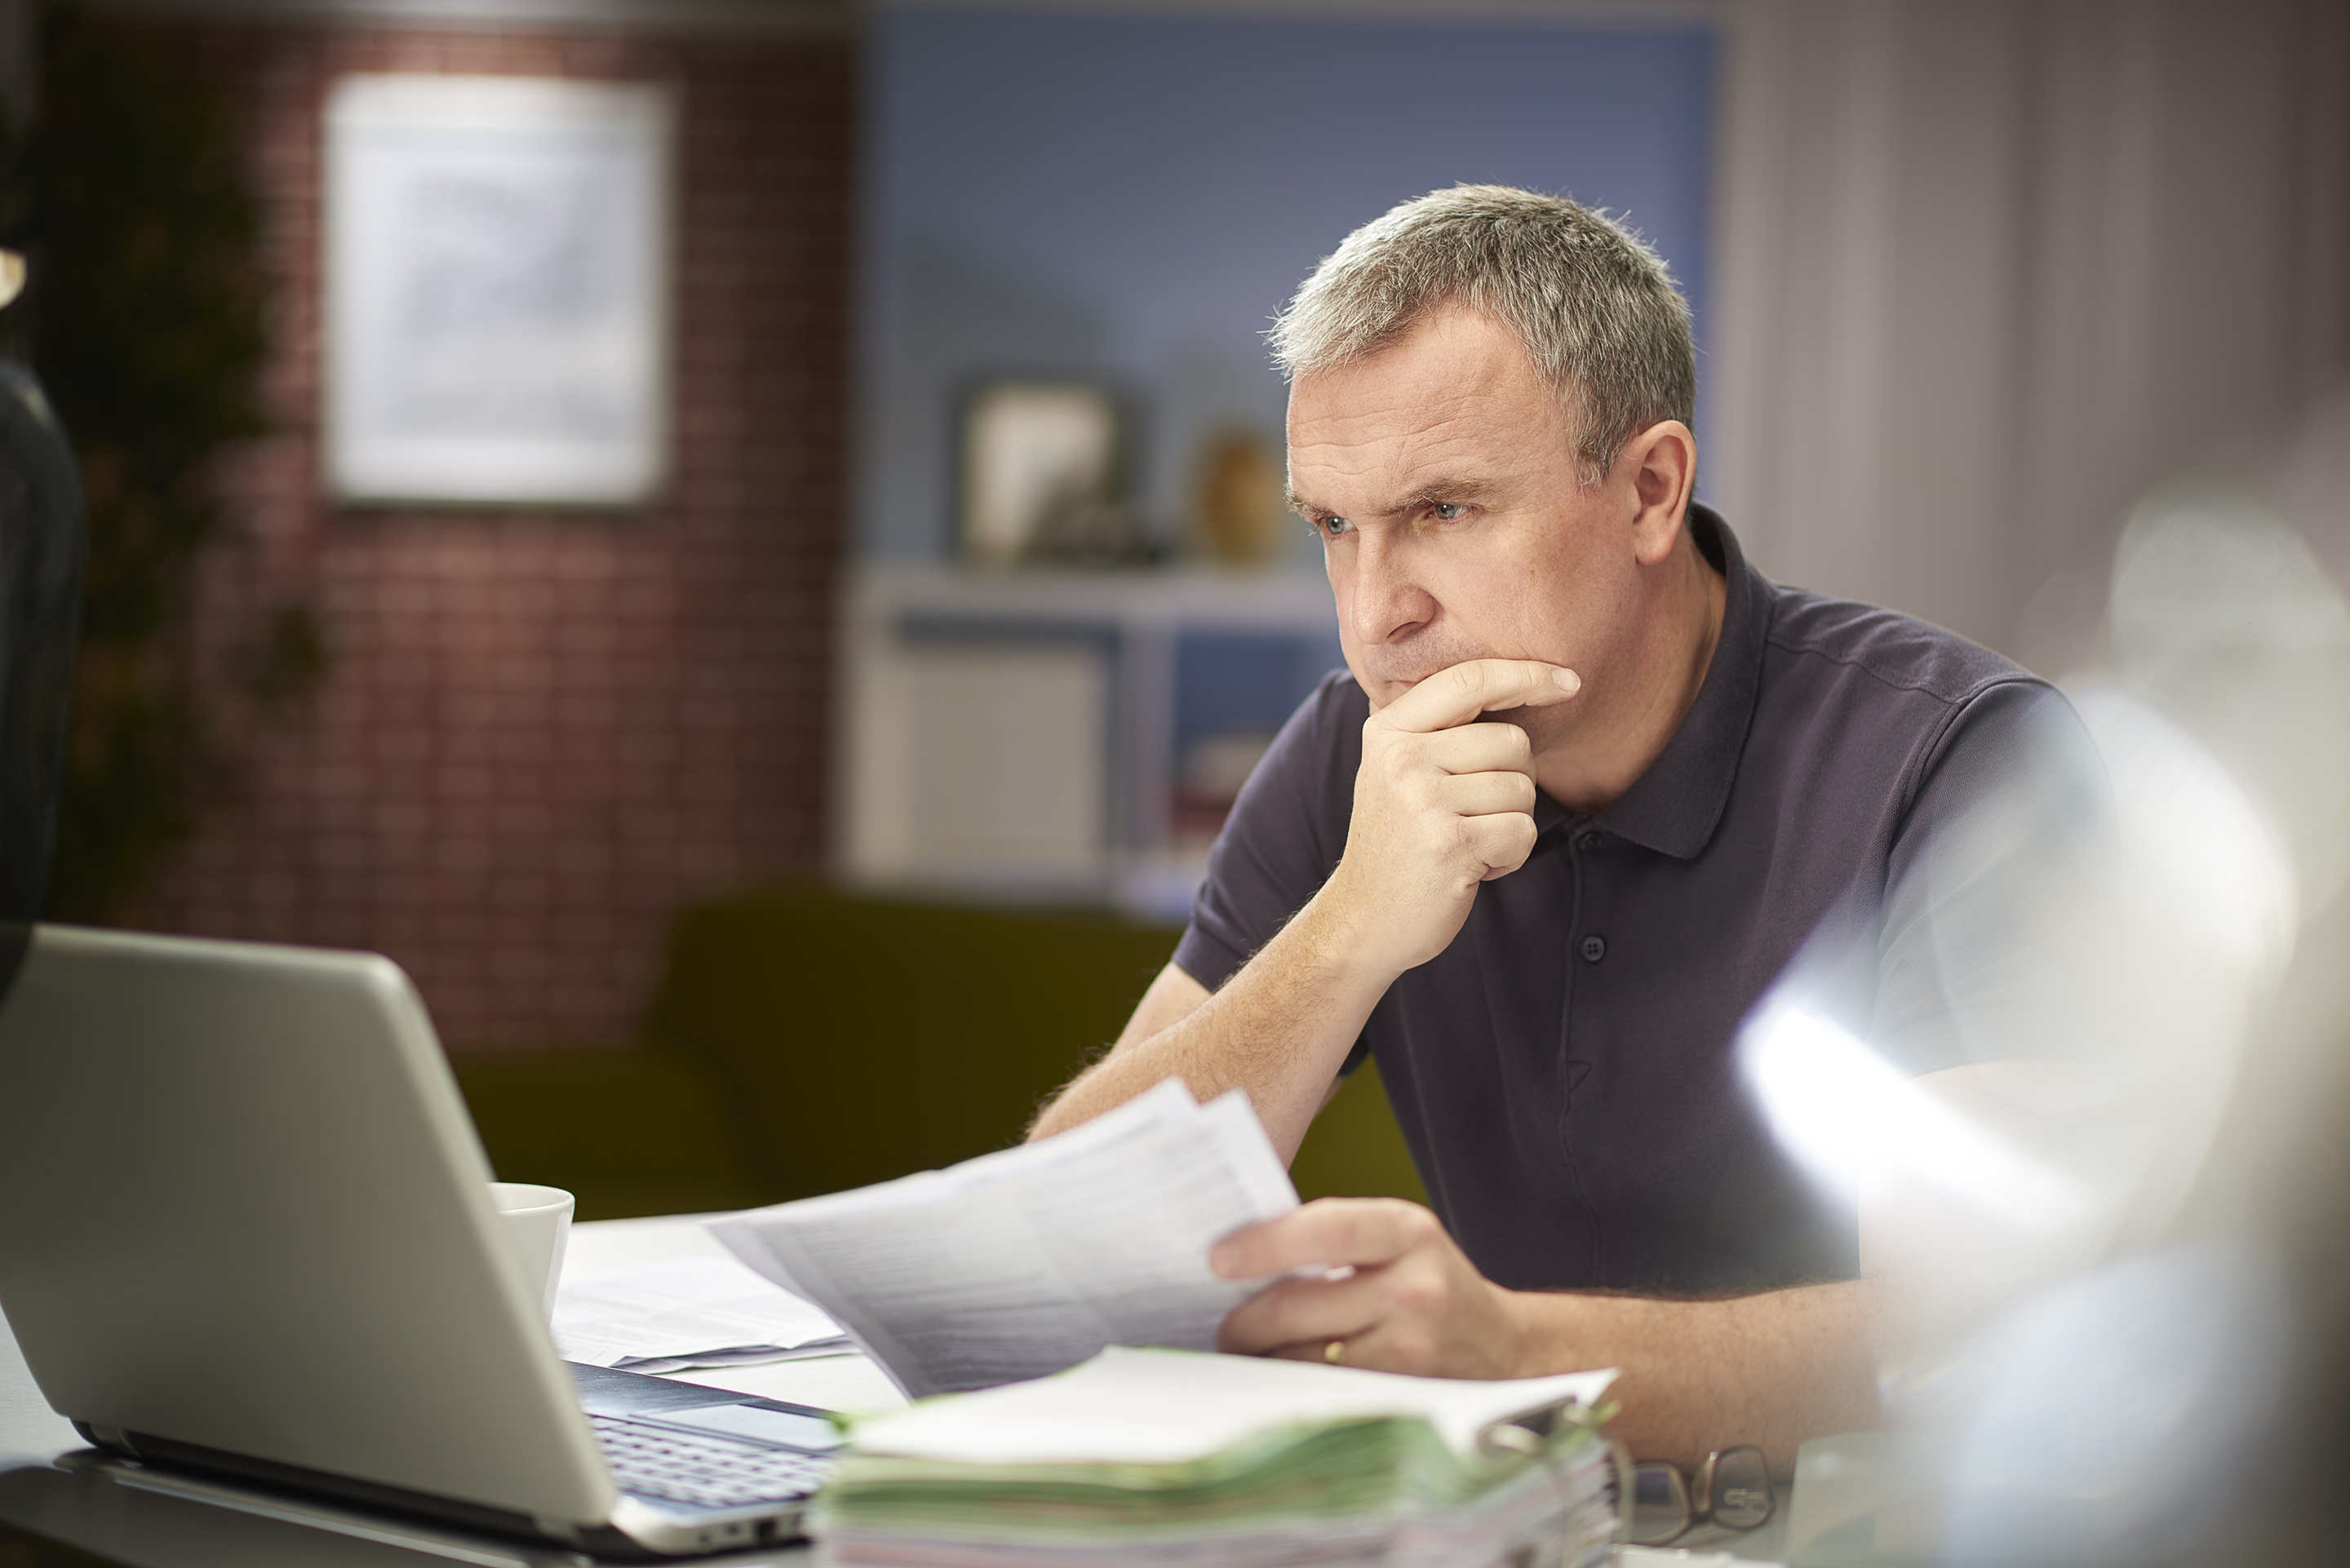 Man going over his small business paperwork with a frustrated expression.